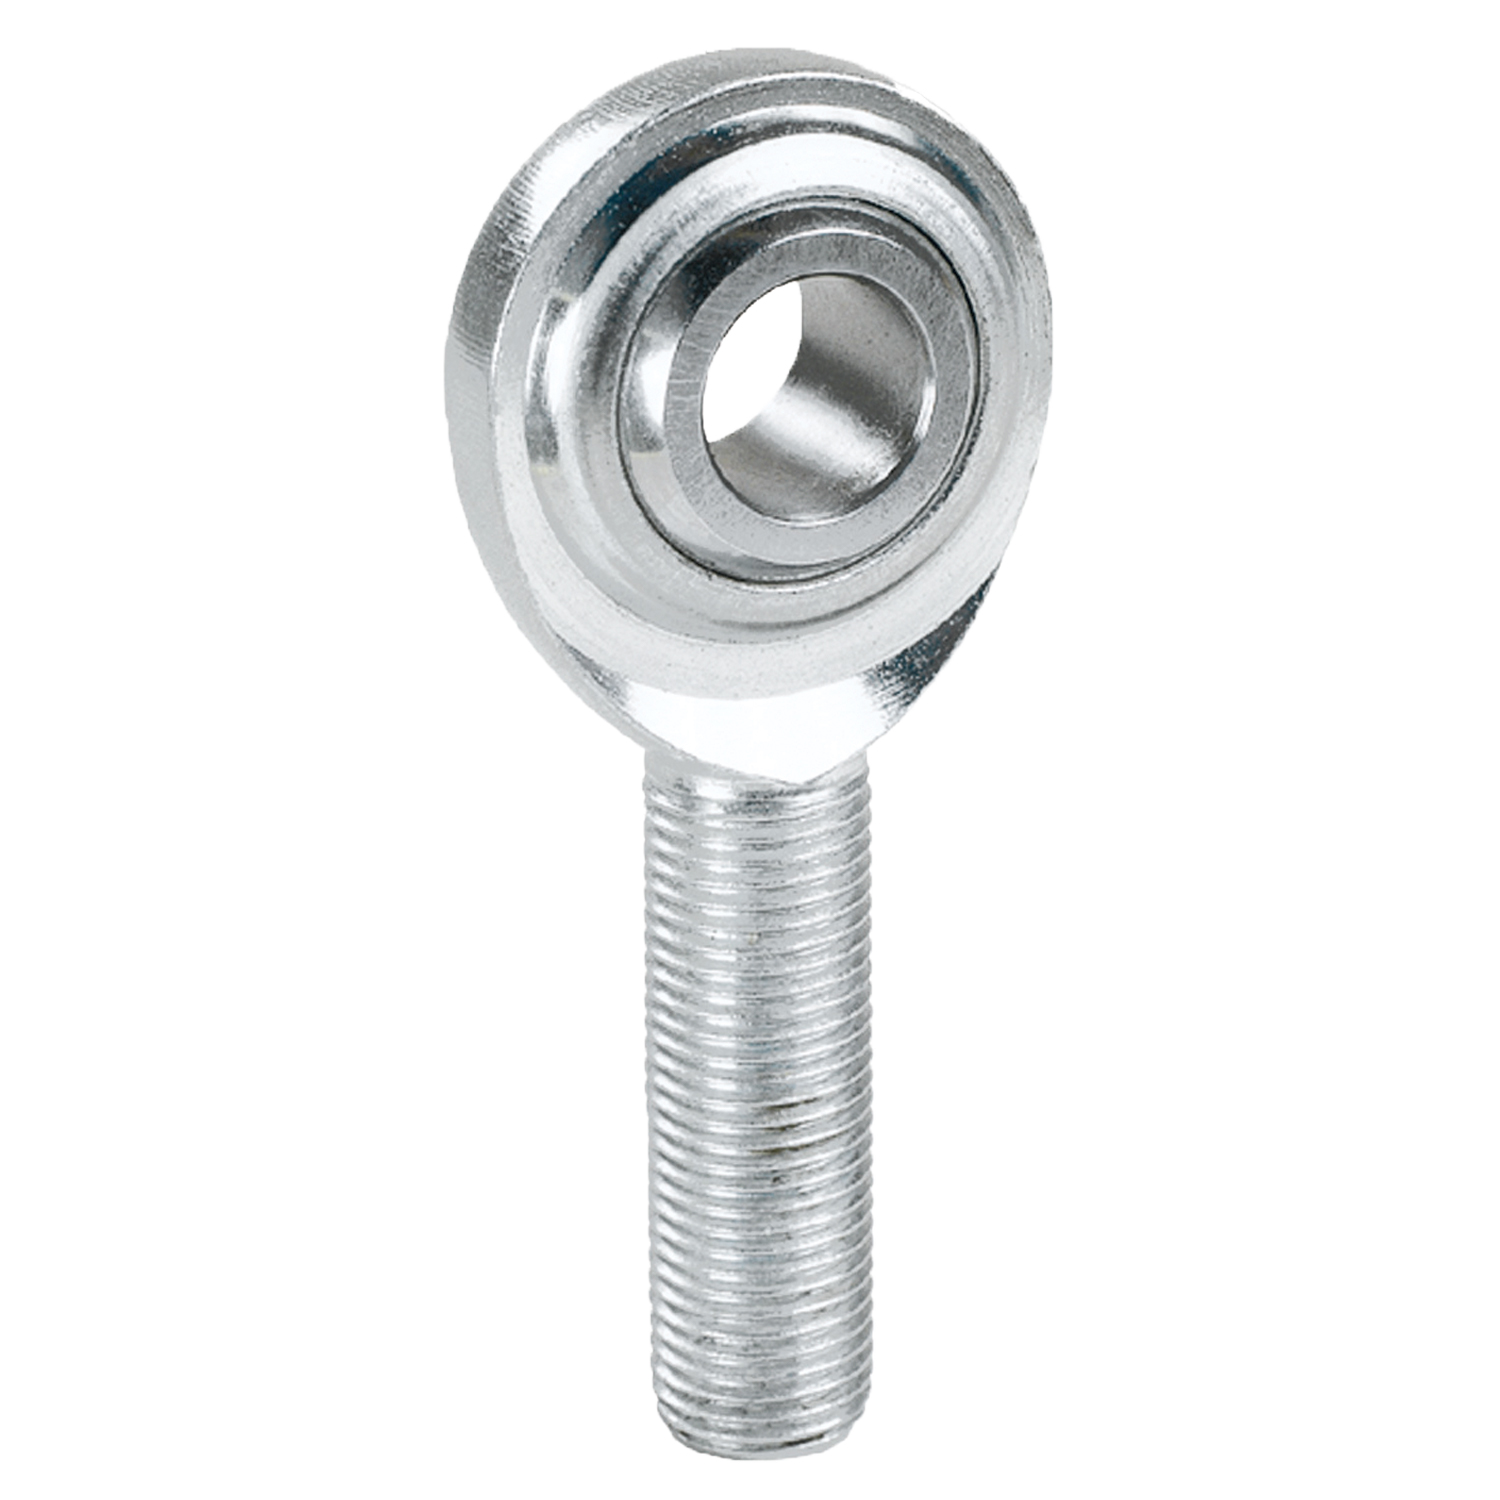 MGM-T Series Stainless Steel Rod End Hole I.D.: 16 mm